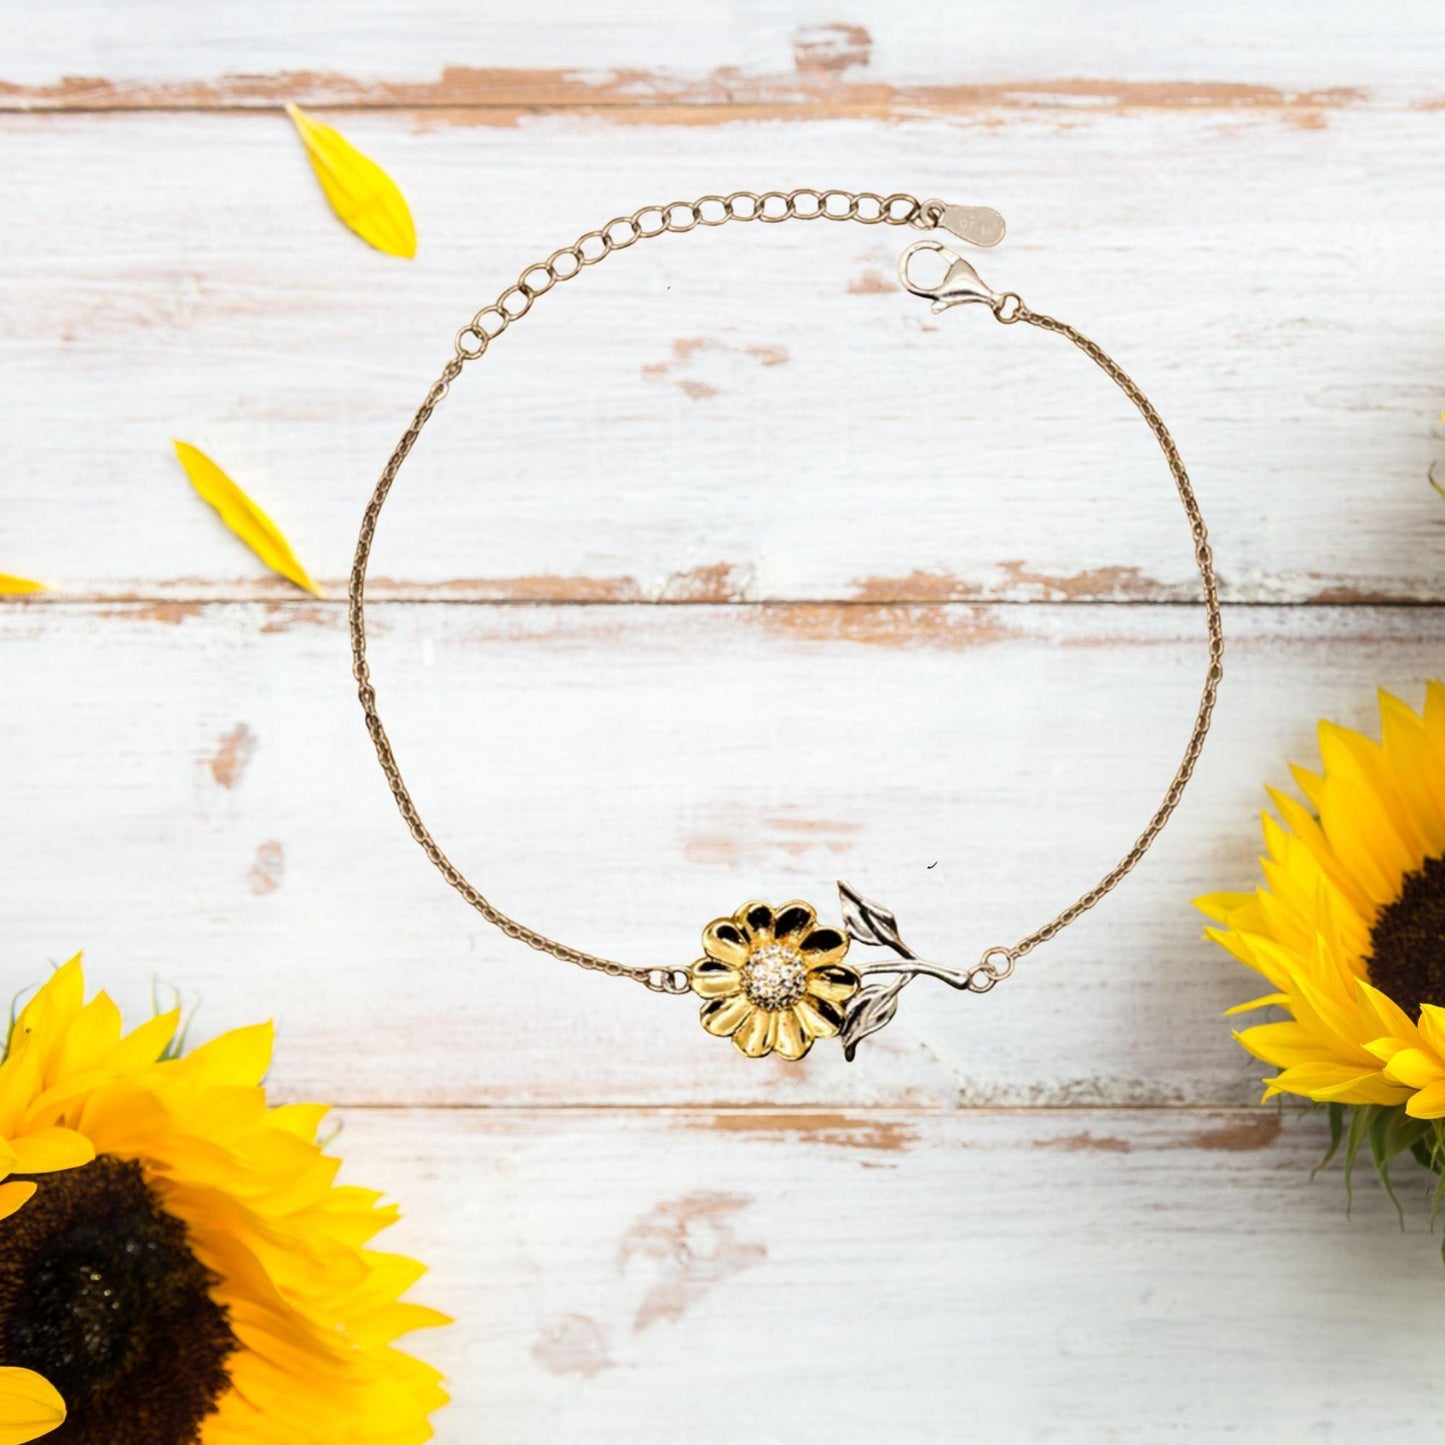 Father-In-Law Sunflower Bracelet - Always Follow your Dreams - Birthday, Christmas Holiday Jewelry Gift - Mallard Moon Gift Shop